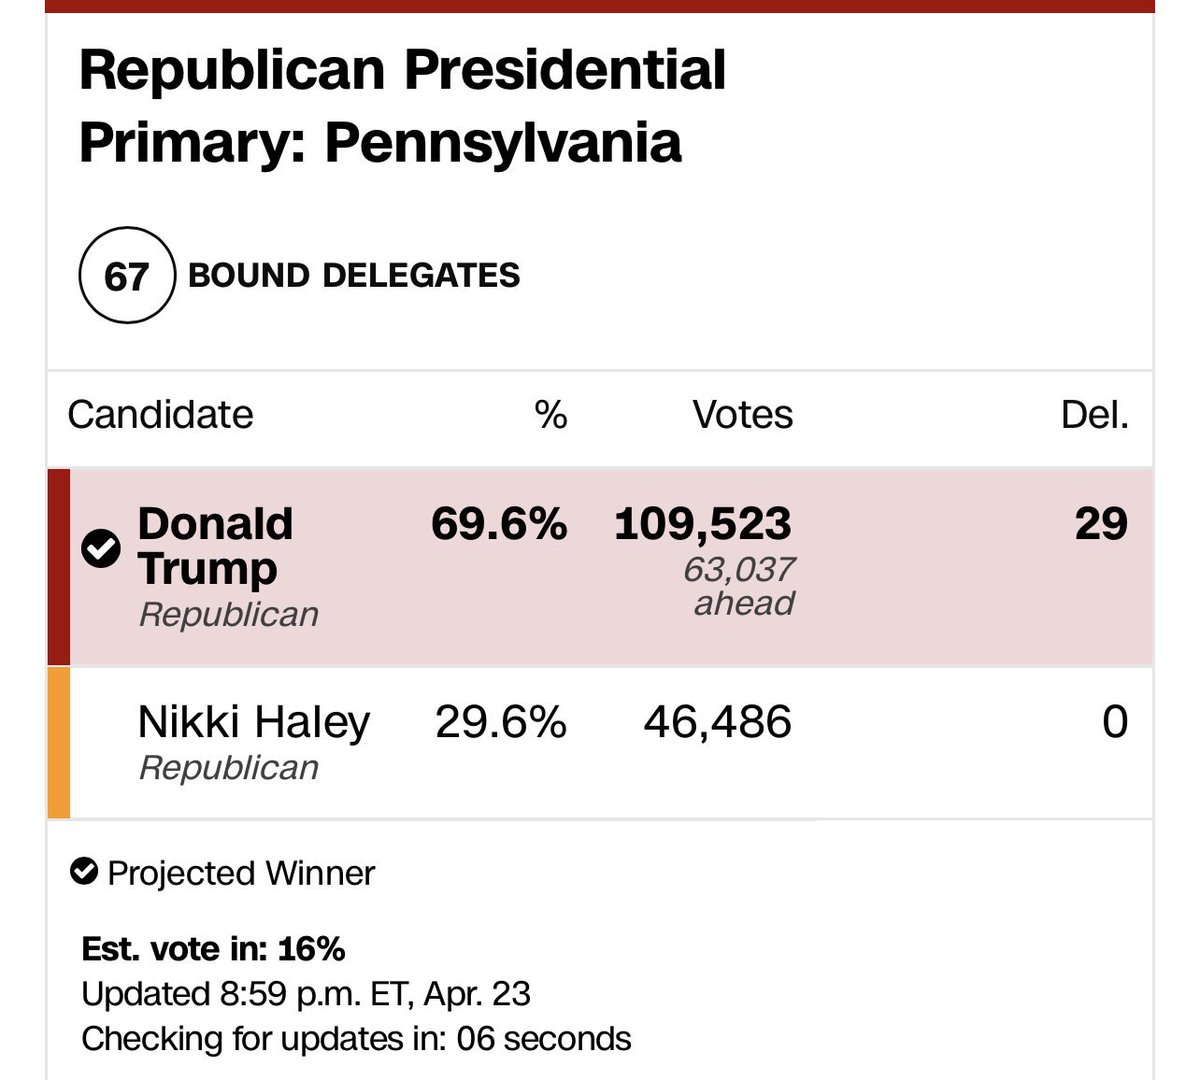 30% of Pennsylvania GOP primary voters are still casting a ballot for @NikkiHaley, while @JoeBiden is getting over 90%.